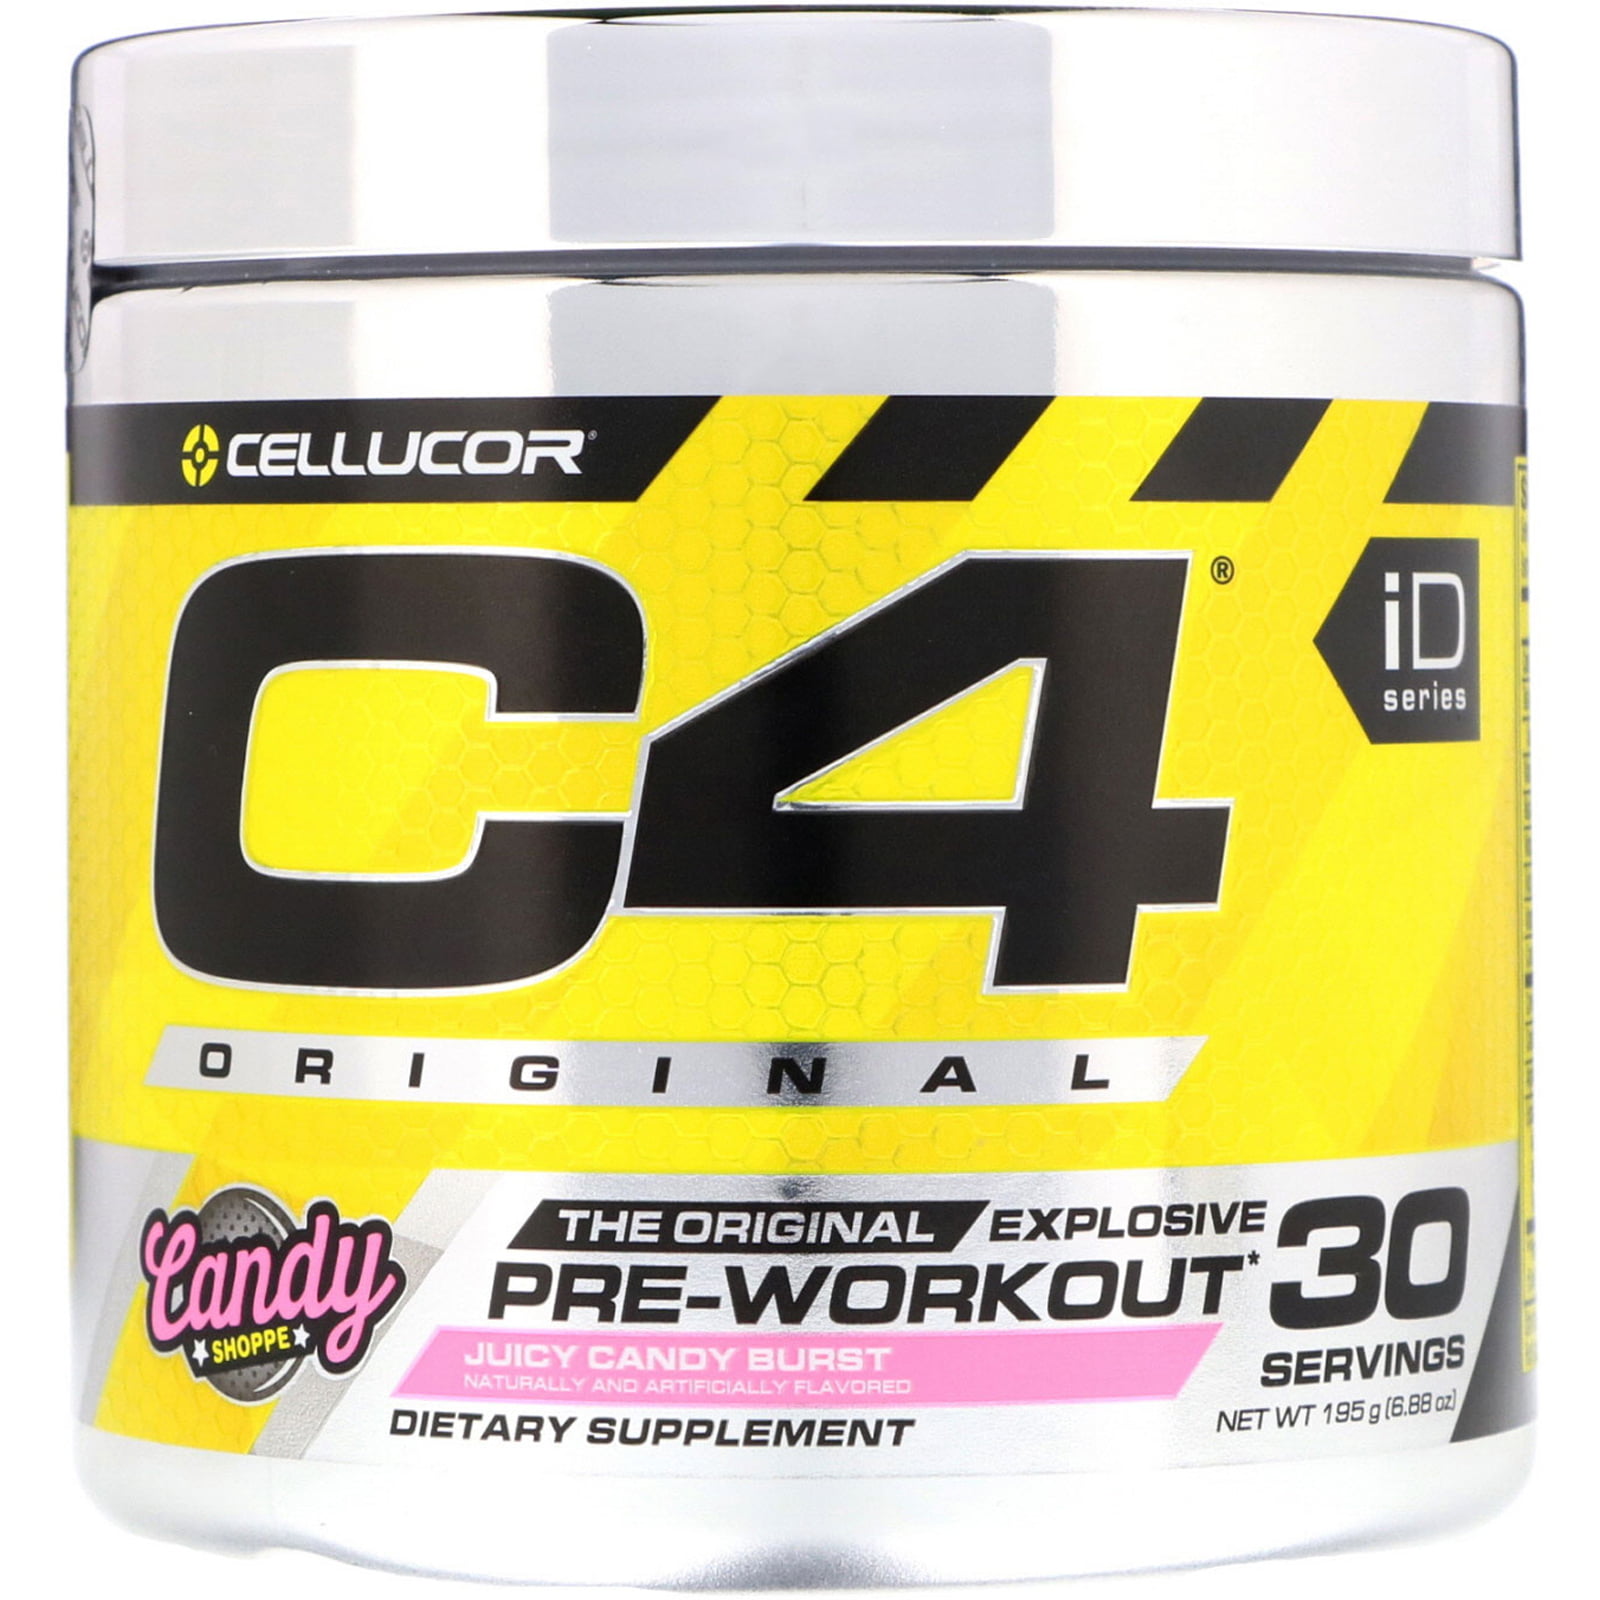 SEALED!! 05/2022 Cellucor C4 Fruit Punch 60 Servings ID Series Pre-Workout EXP 